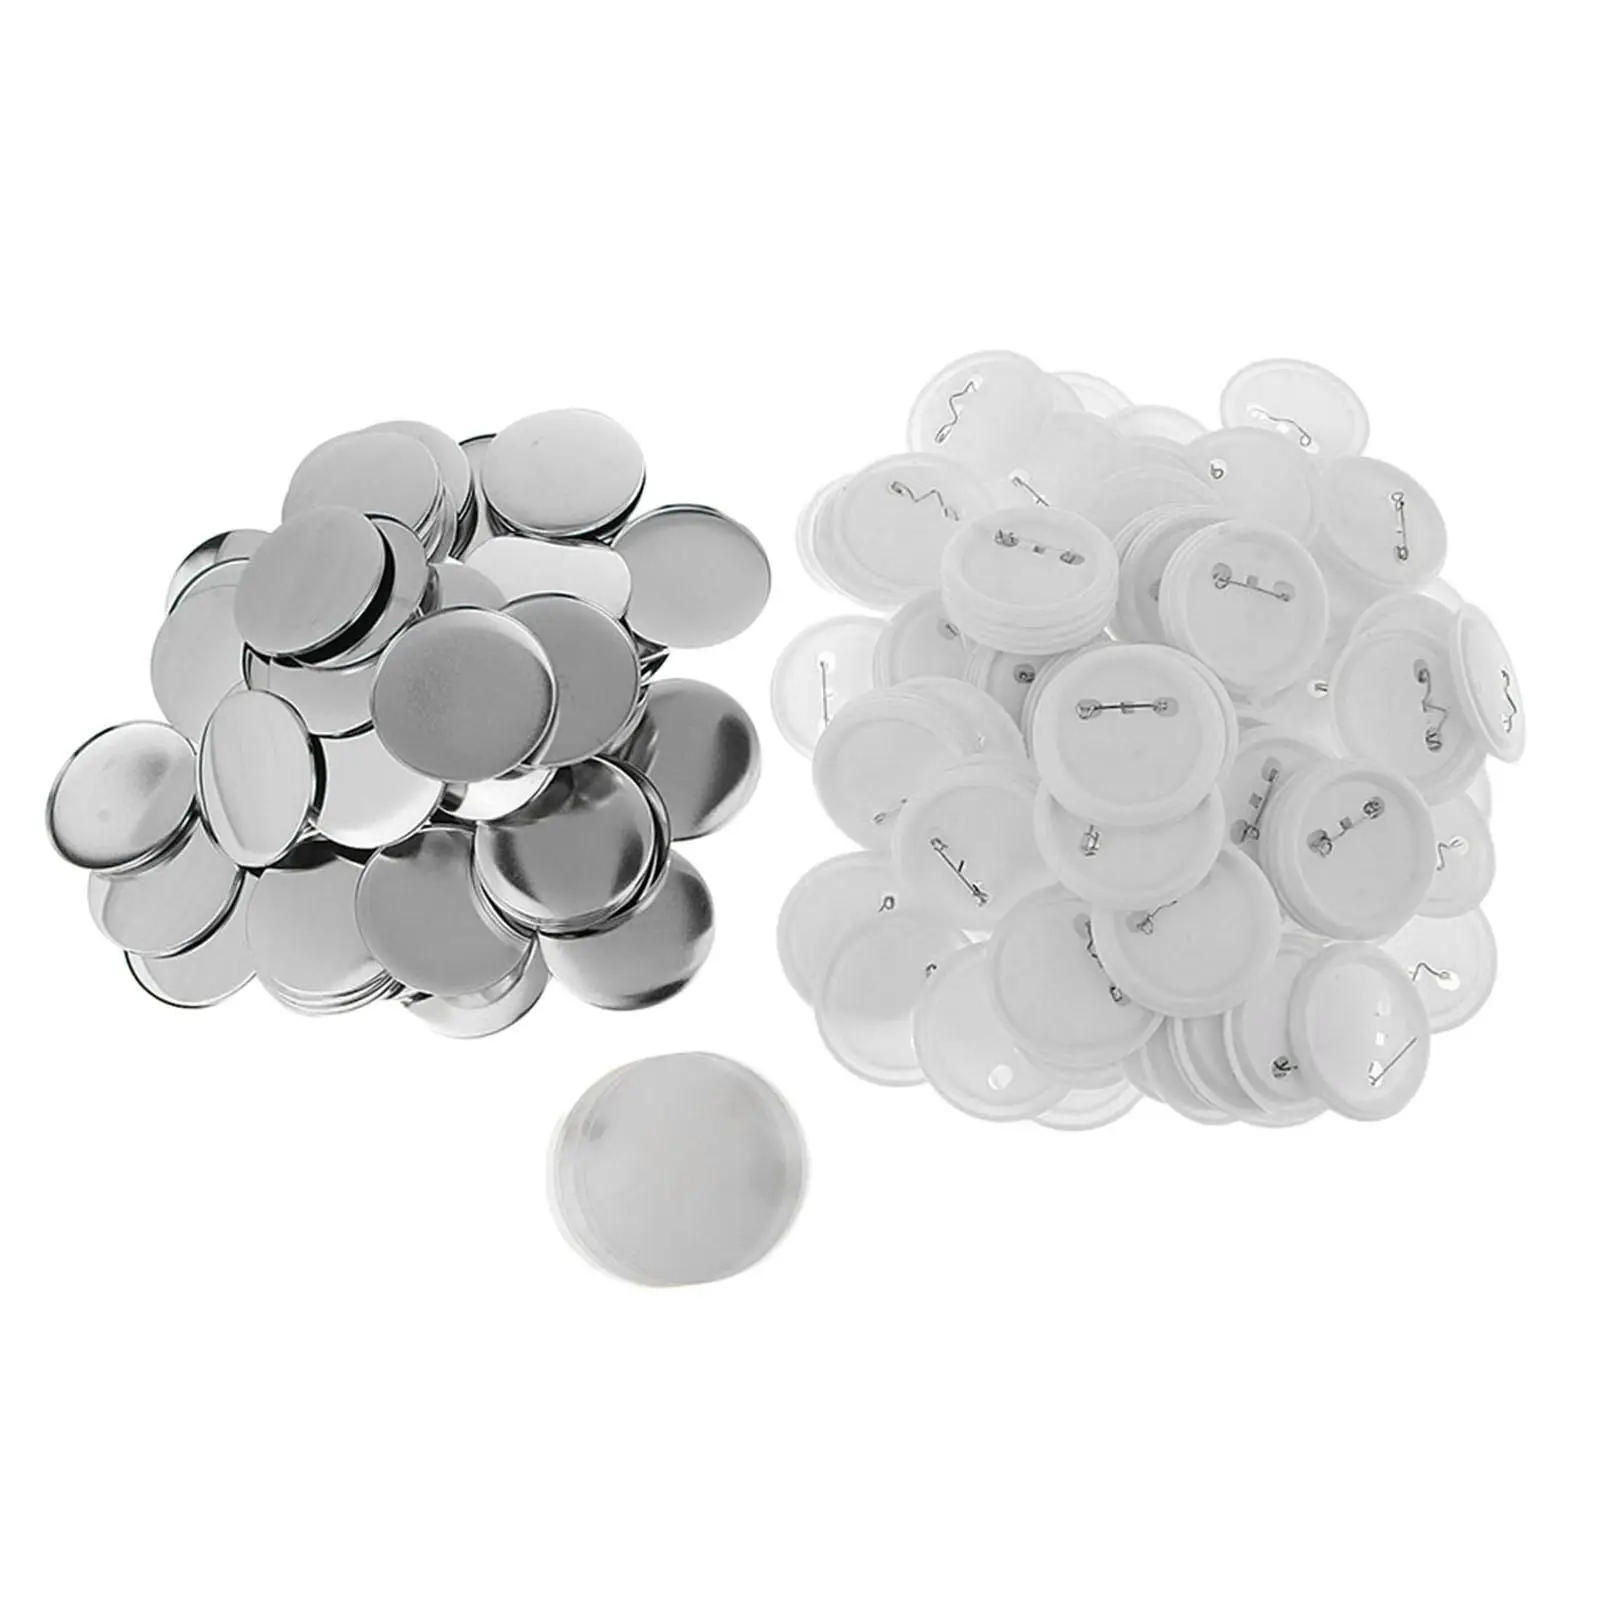 Blank Button Making Supplies Round Pin Button Badge Parts for Button Maker Machine Presents with Metal Cover, Base, Film